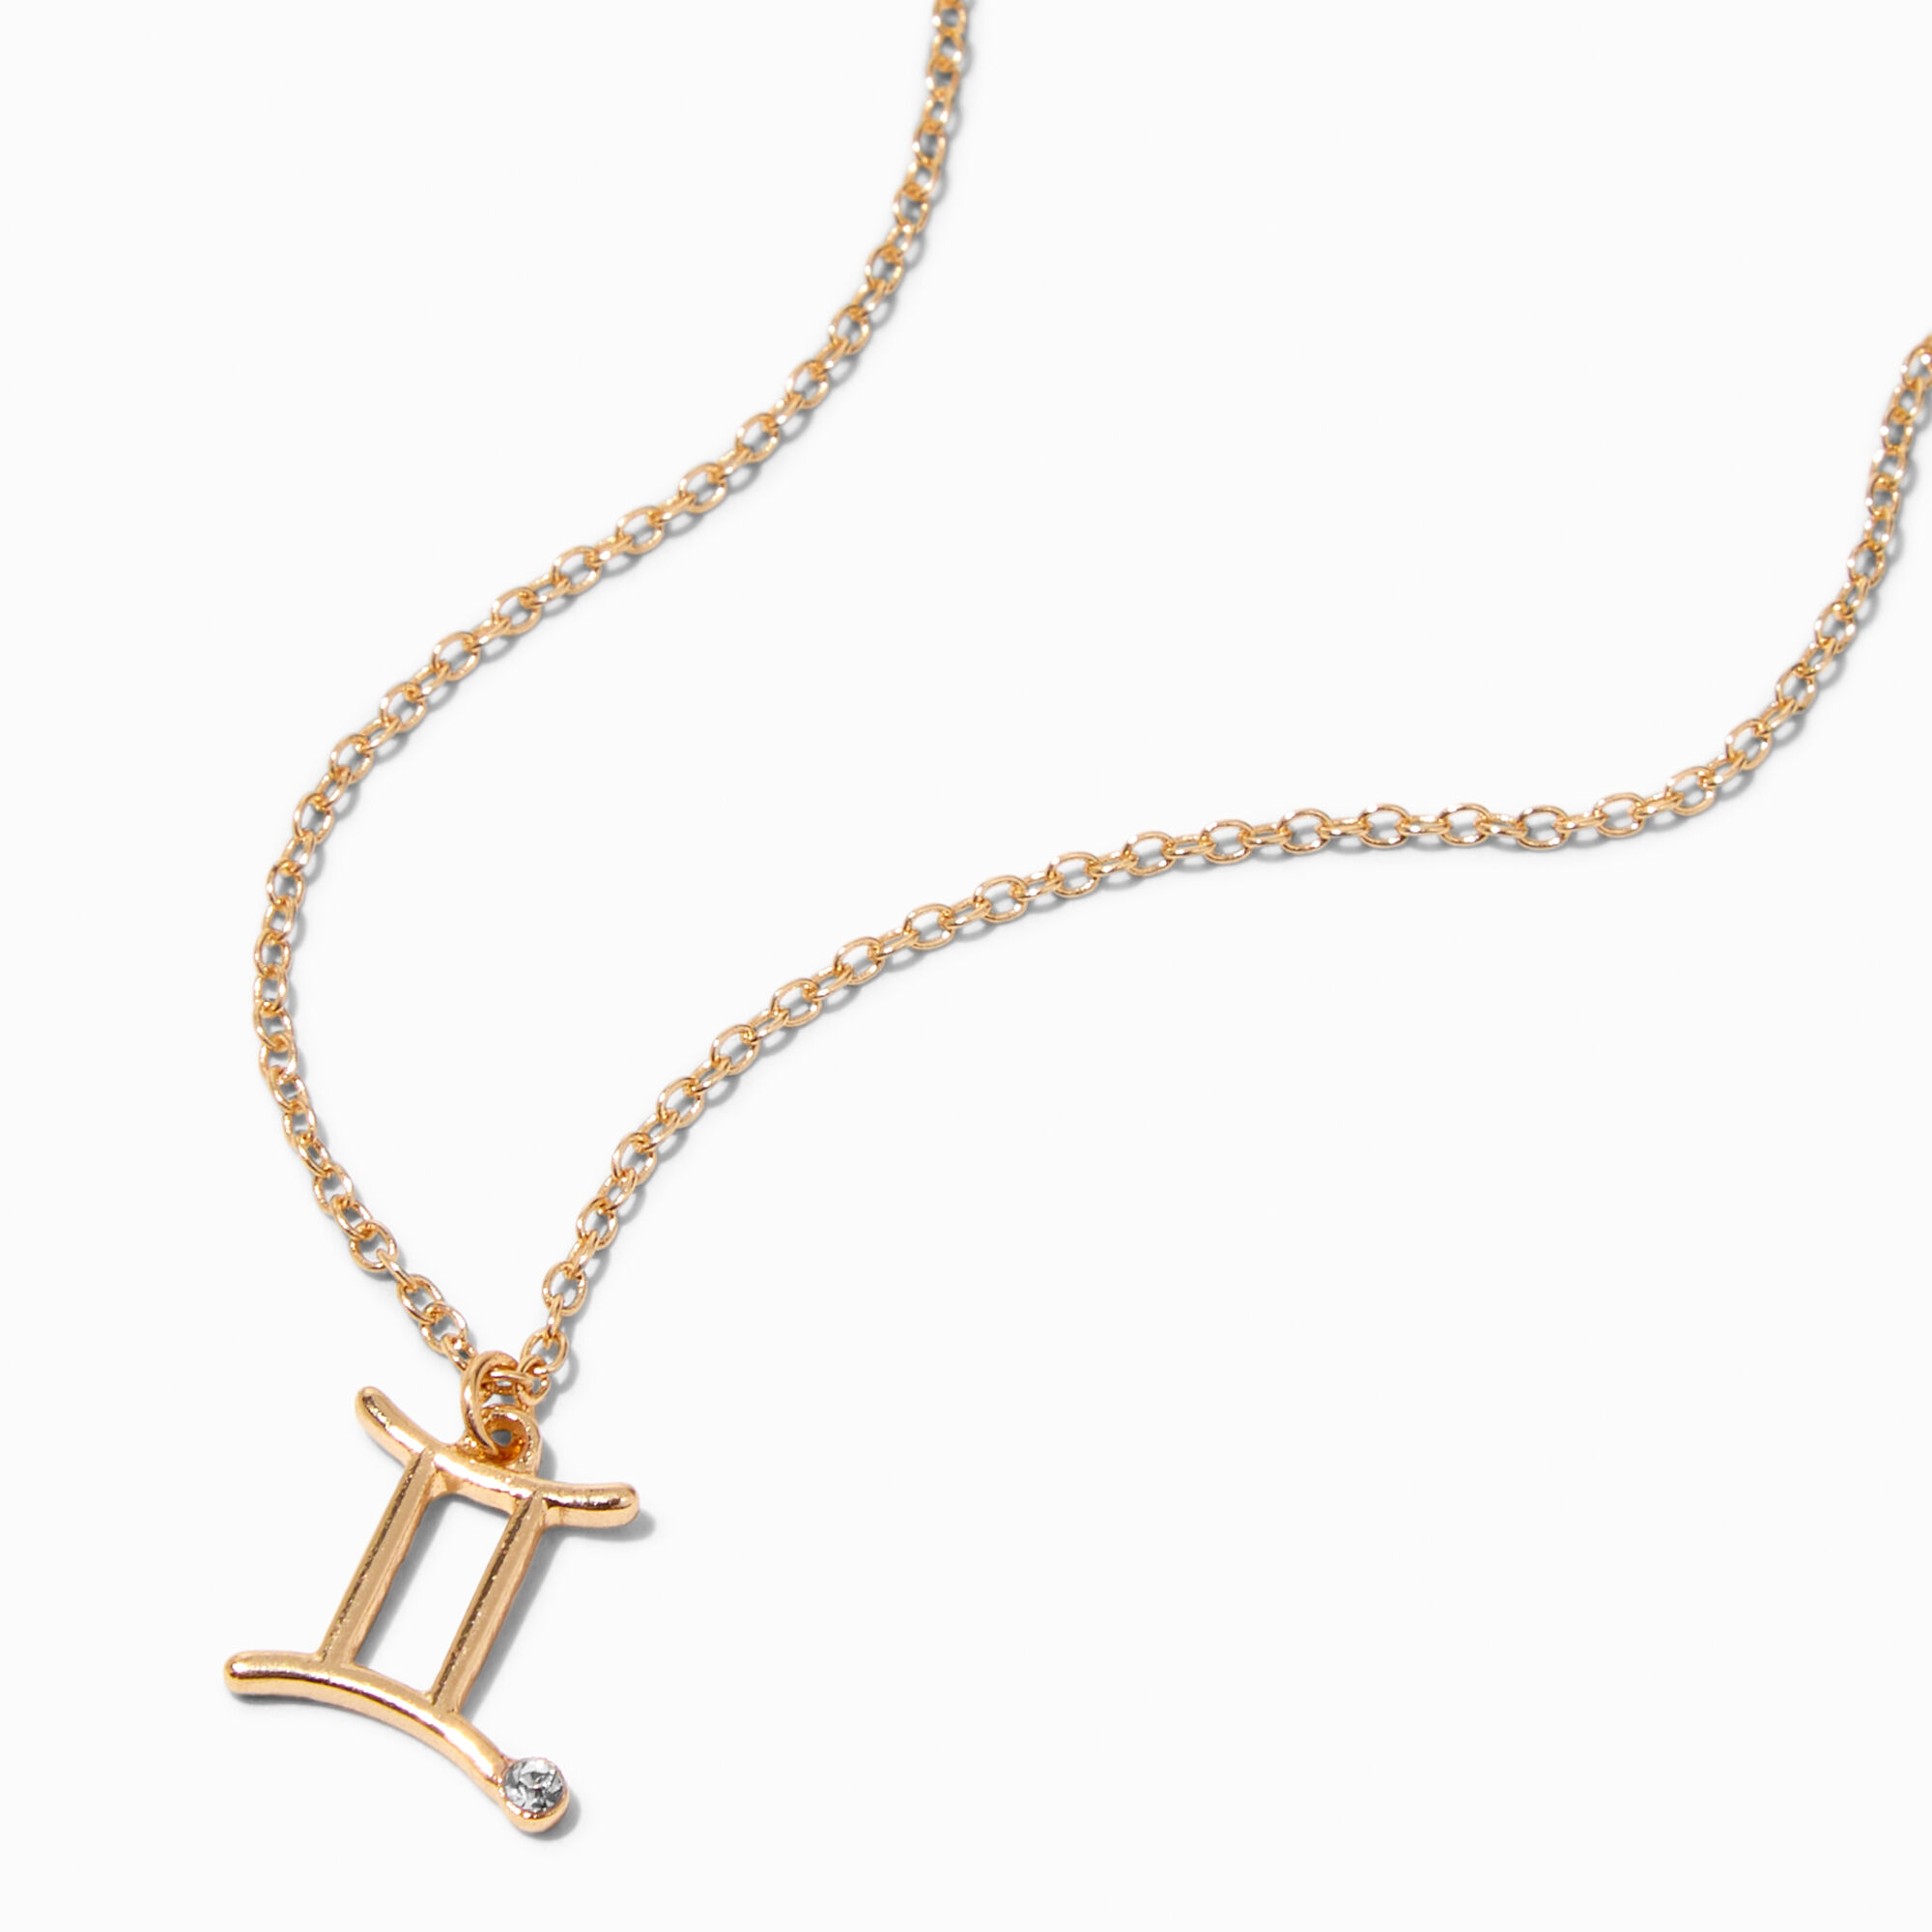 Cancer Zodiac Necklace In Yellow Gold - Eliza Wills Jewellery